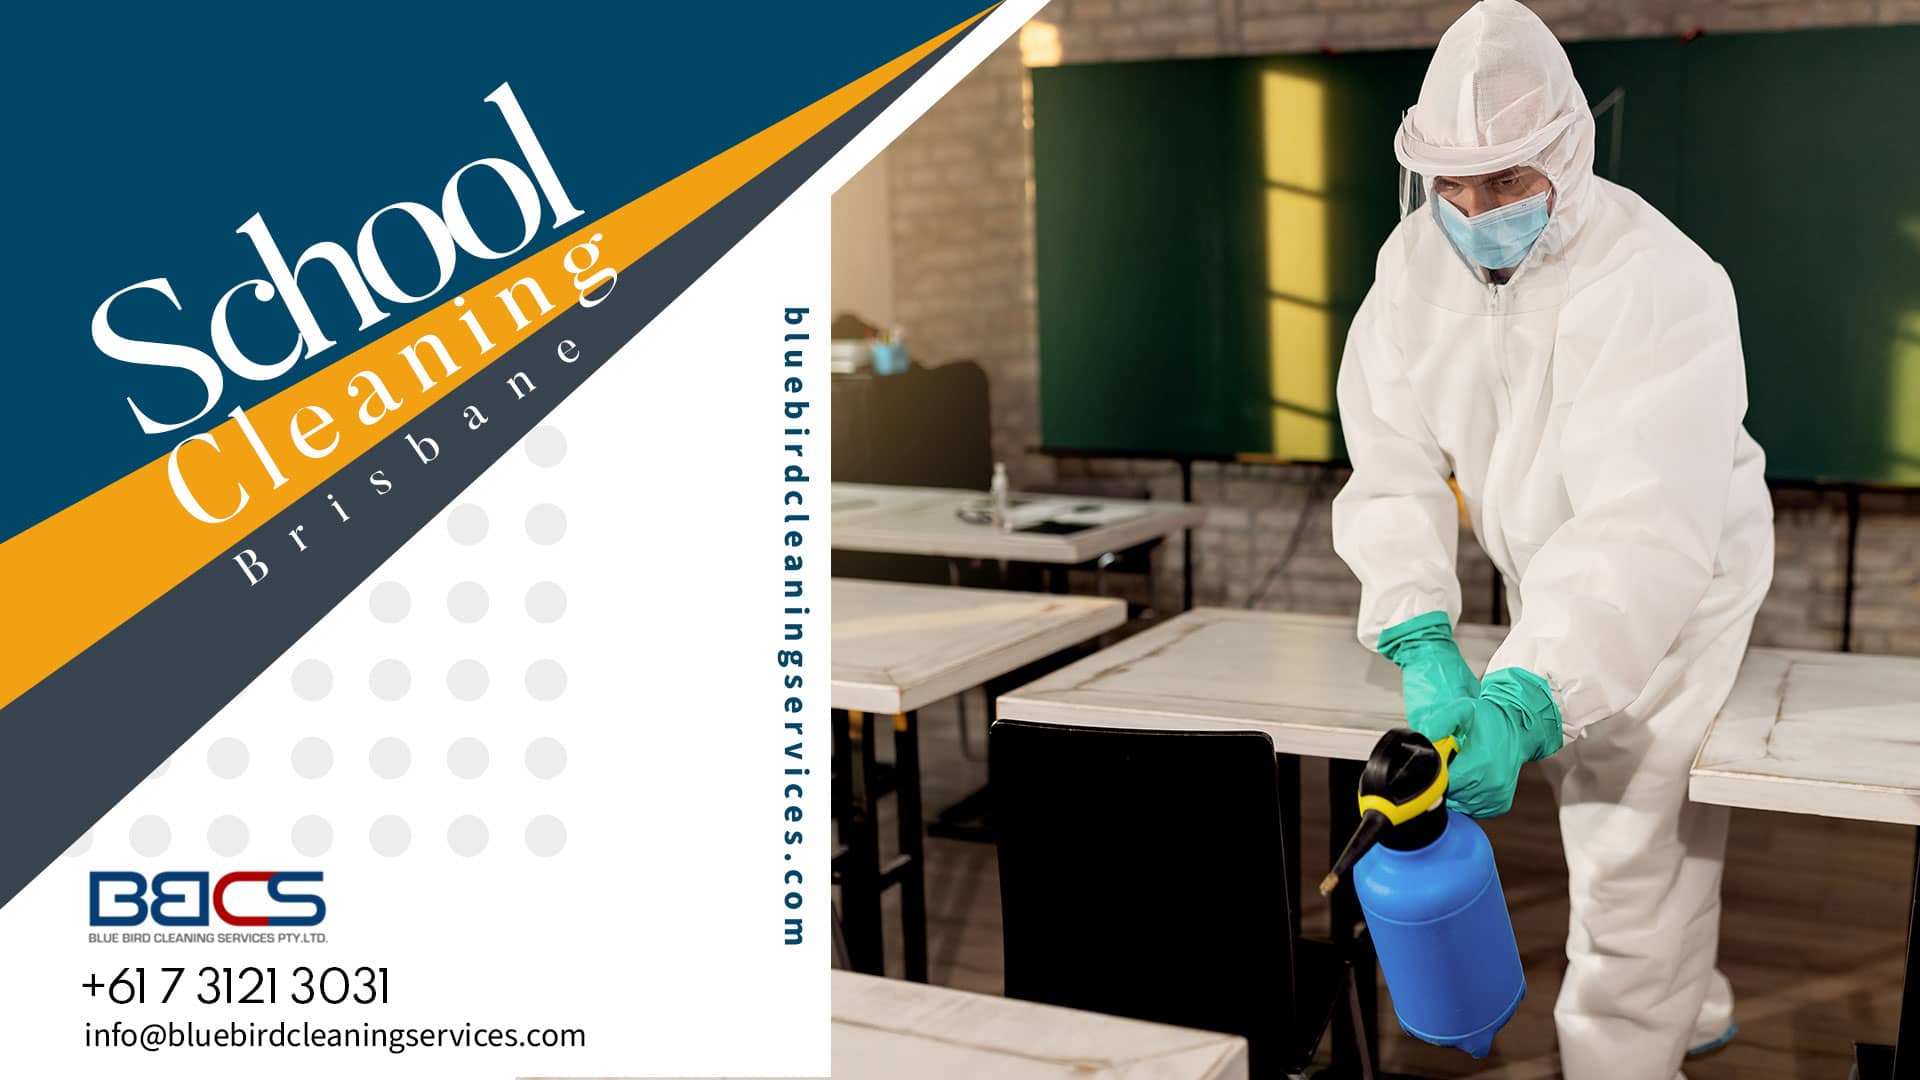 Some Outstanding Benefits That a School Cleaning Service Has To Offer